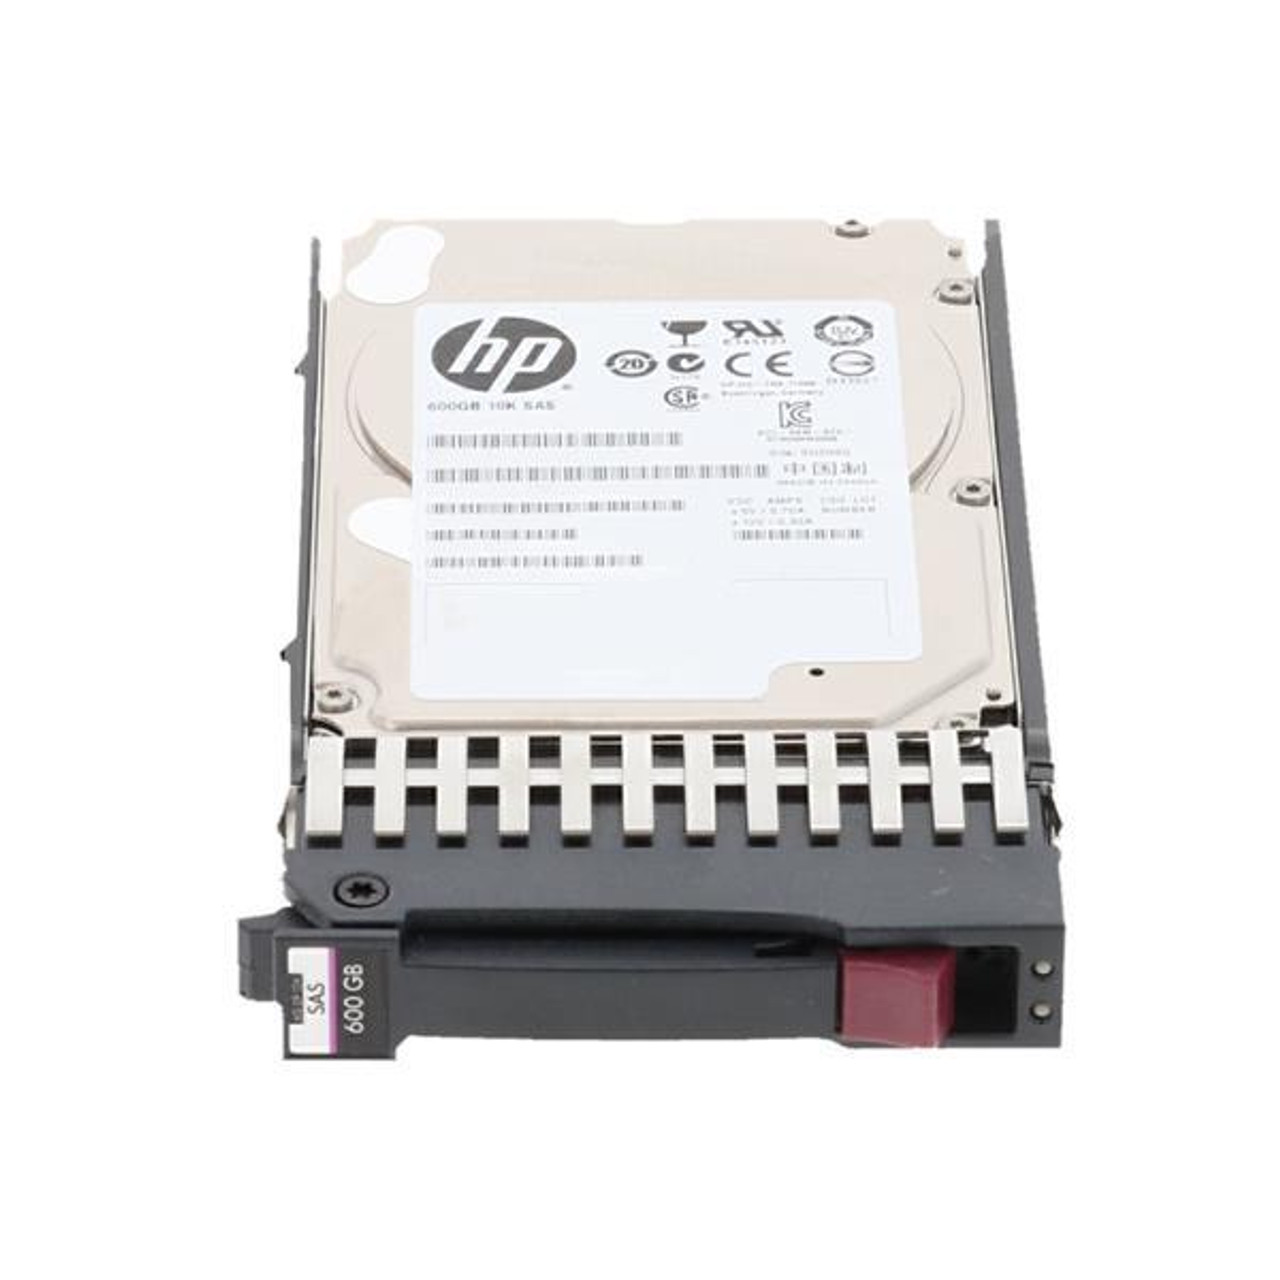 870757-S21 HP 600GB 15000RPM SAS 12Gbps 2.5-inch Internal Hard Drive with Smart Carrier for G8 and G9 Server Systems